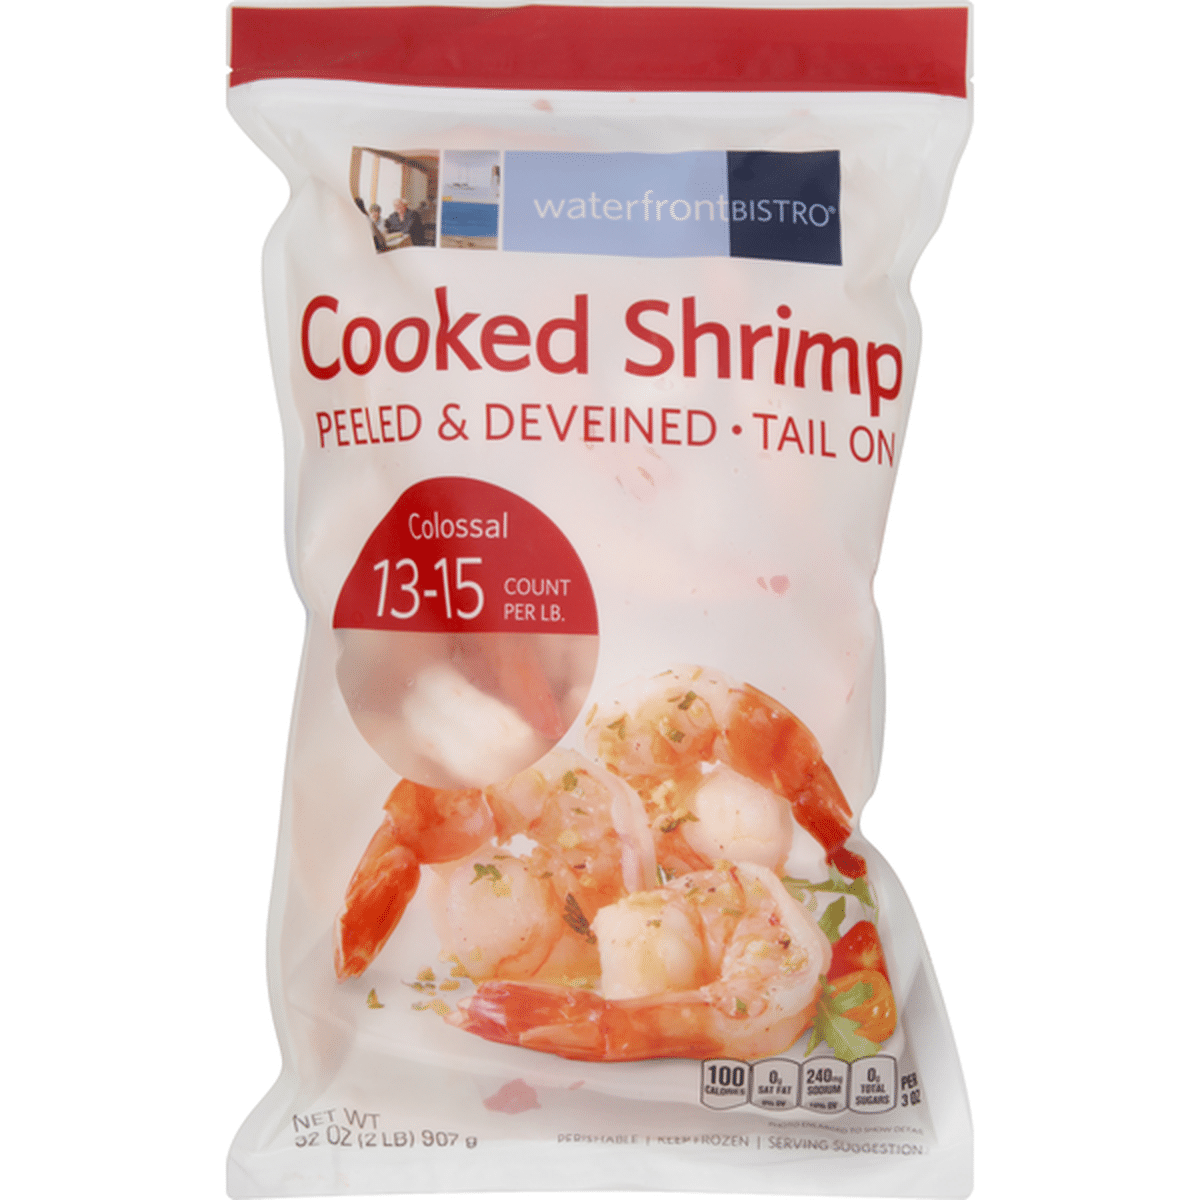 Waterfront Bistro Shrimp, Cooked, Peeled & Deveined. Tail On, Colossal (32  oz) Delivery or Pickup Near Me - Instacart